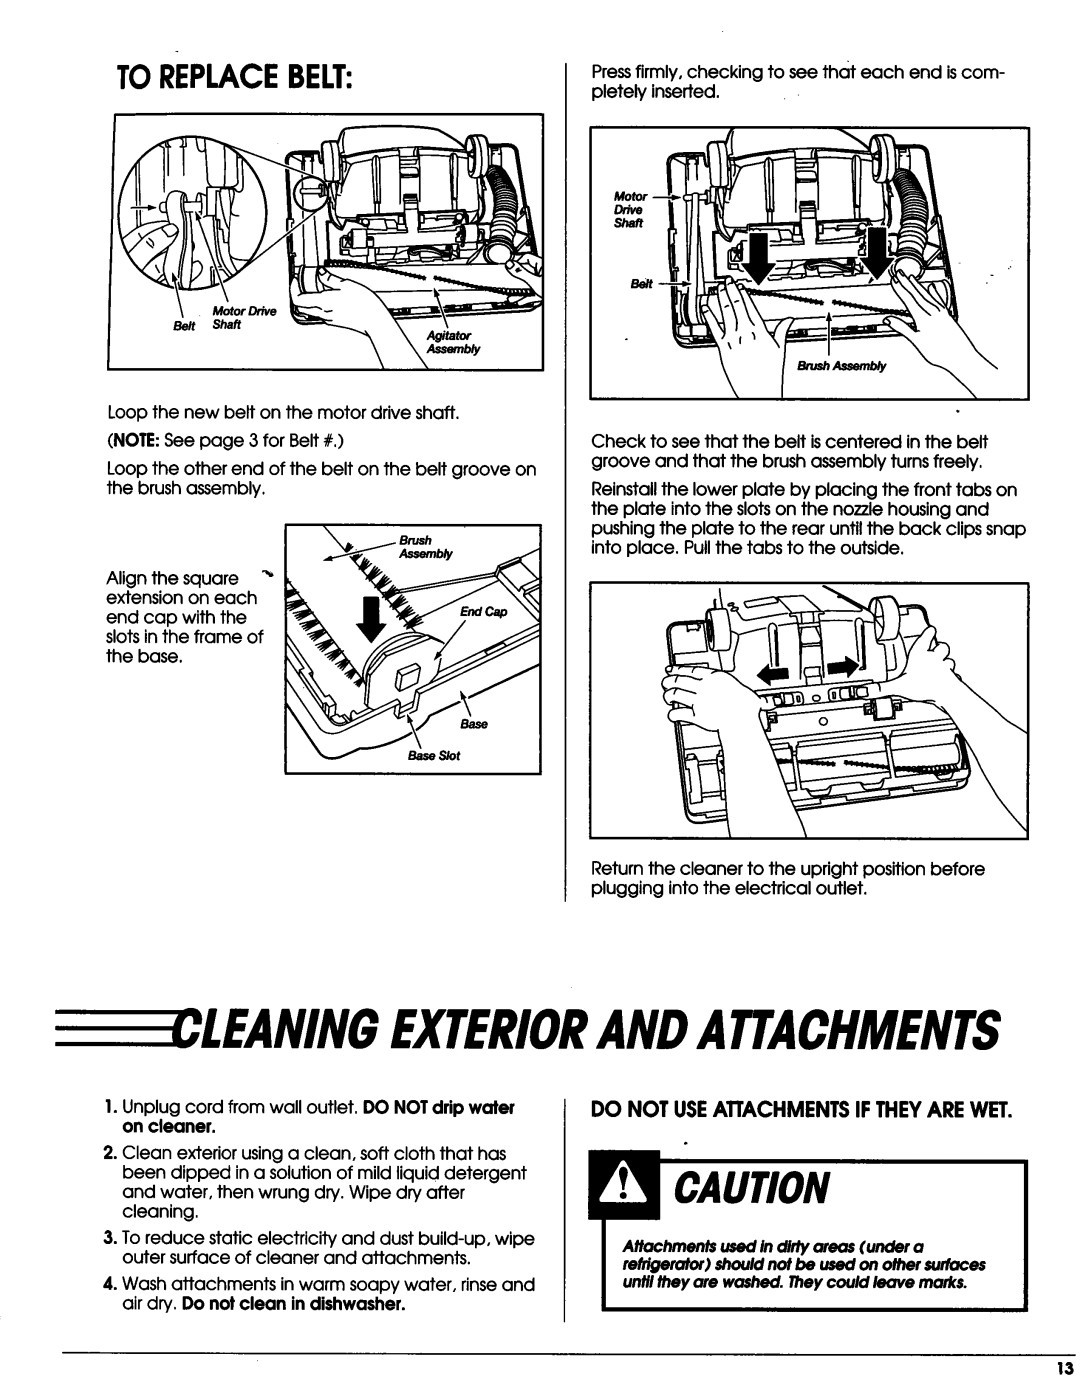 Sears Vacuum Cleaner owner manual Leaning Exteriorandattachments, Toreplacebelt, on cleaner 